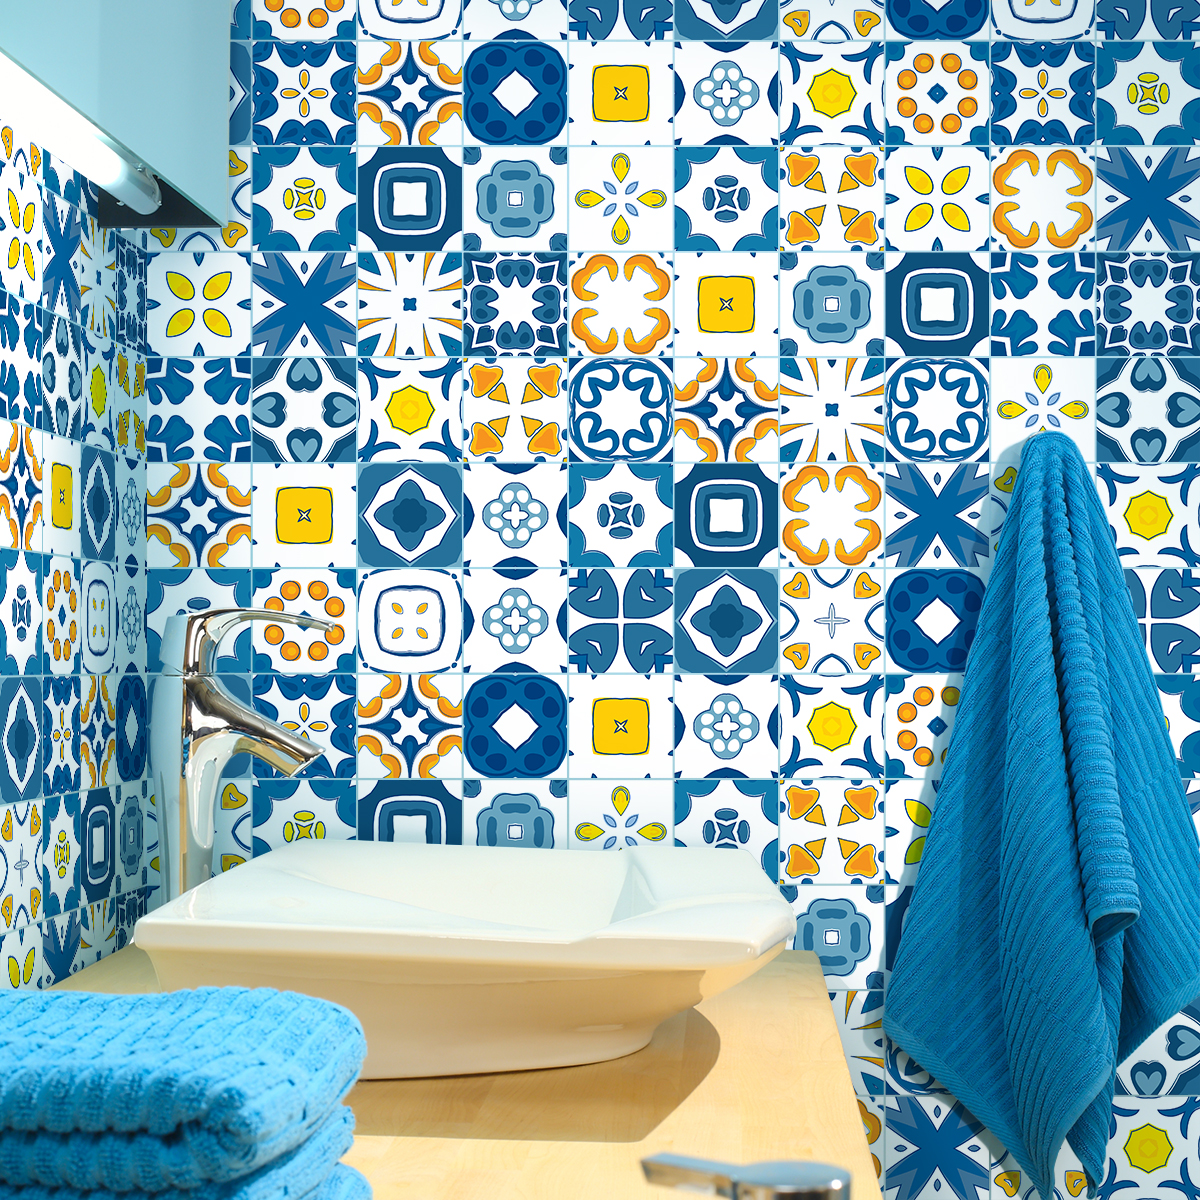 30 wall stickers cement tiles azulejos ania